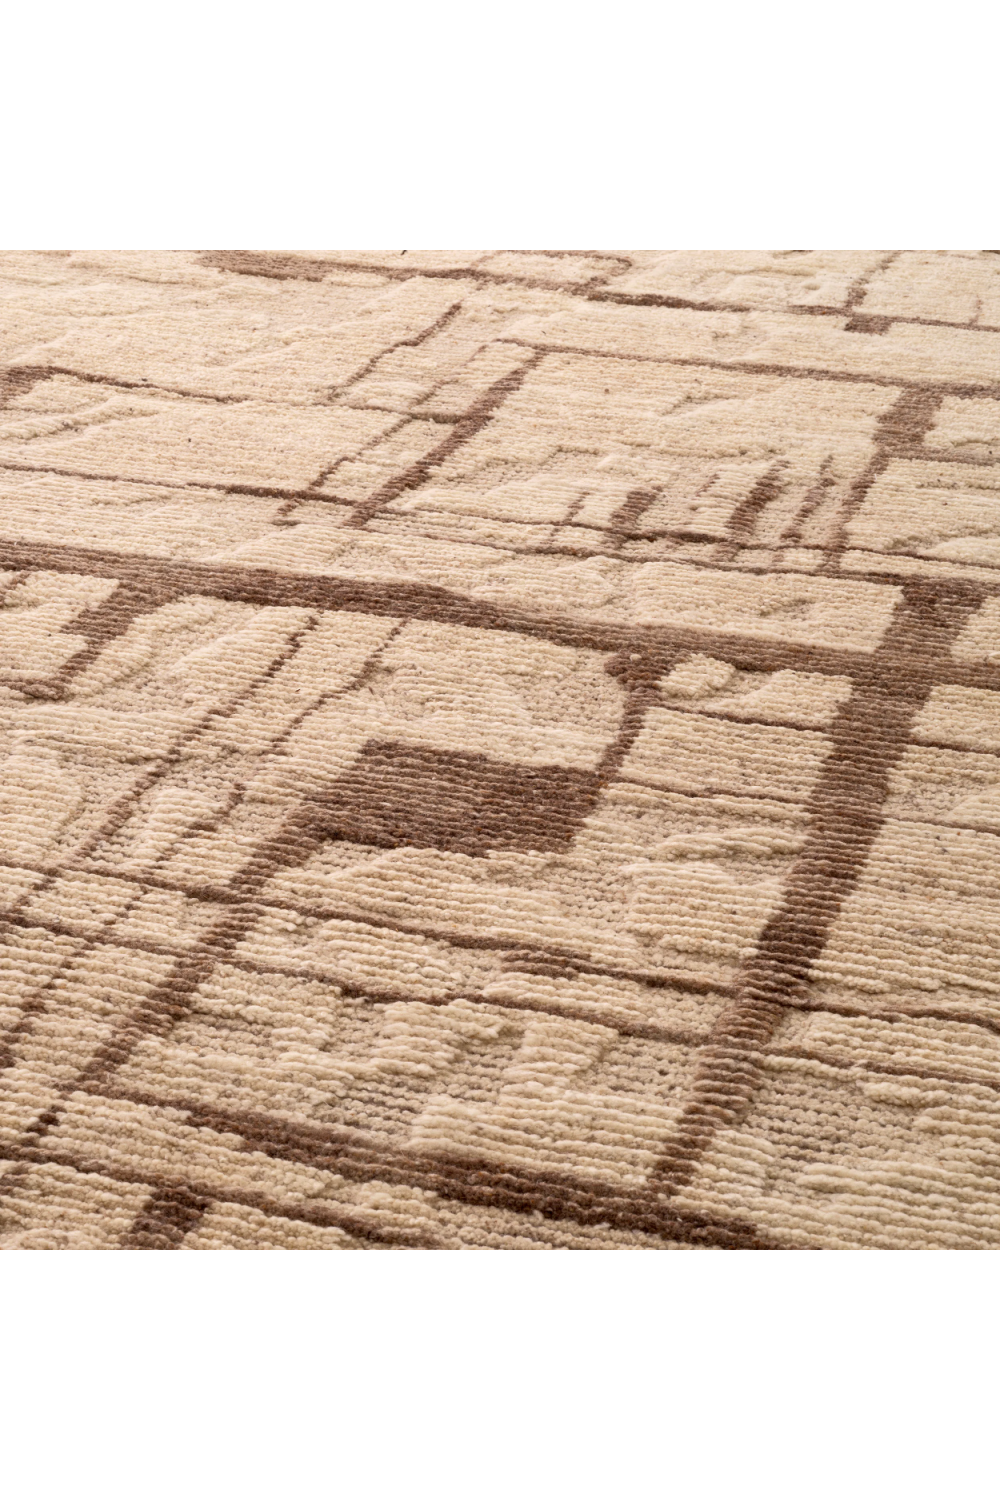 Hand-Knotted Brown Wool Carpet | Eichholtz Limitless | Oroa.com